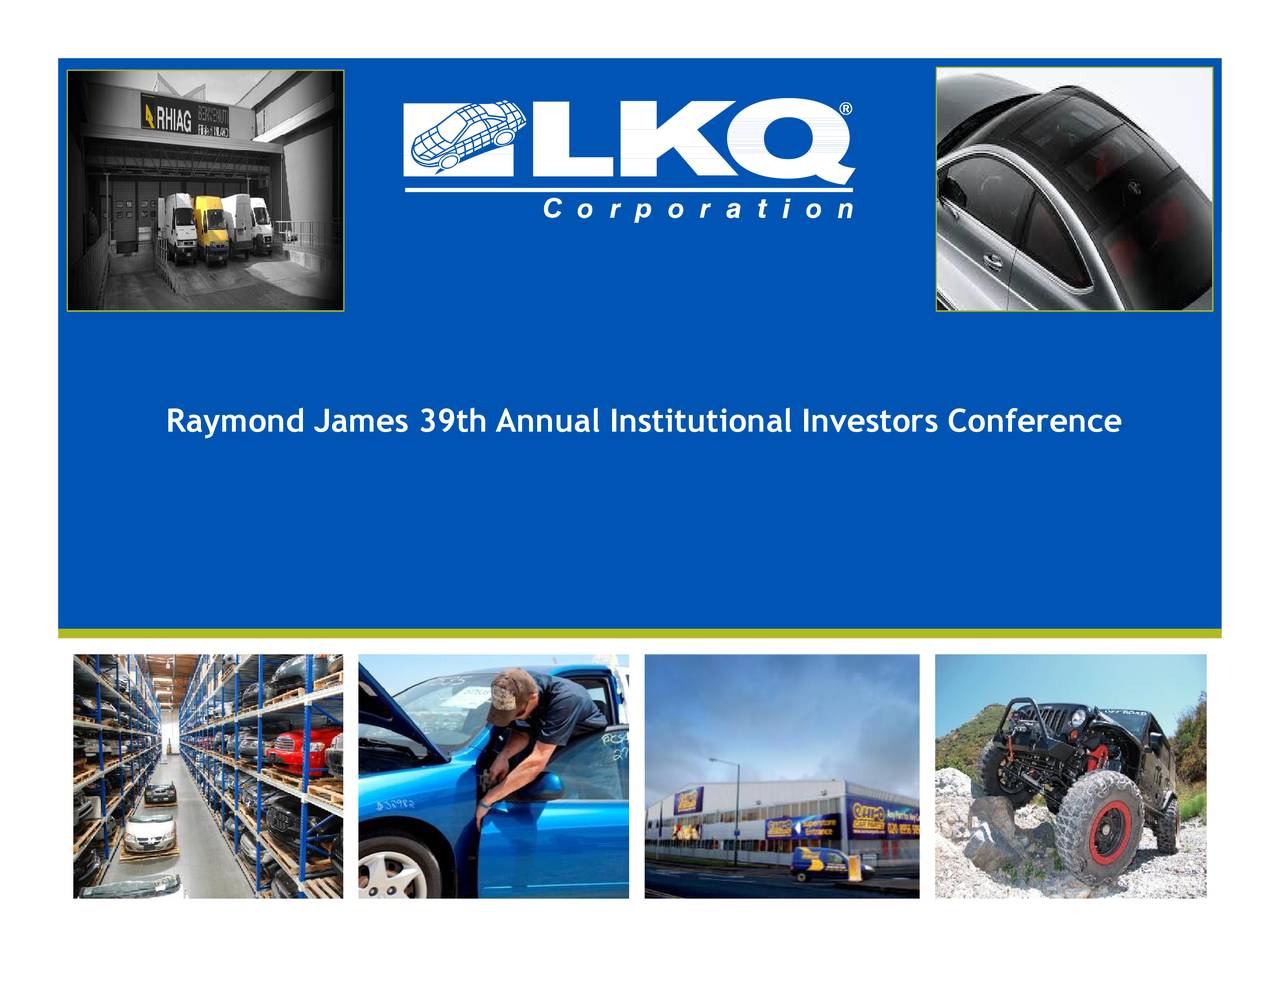 Raymond James 39th Annual Institutional Investors Conference